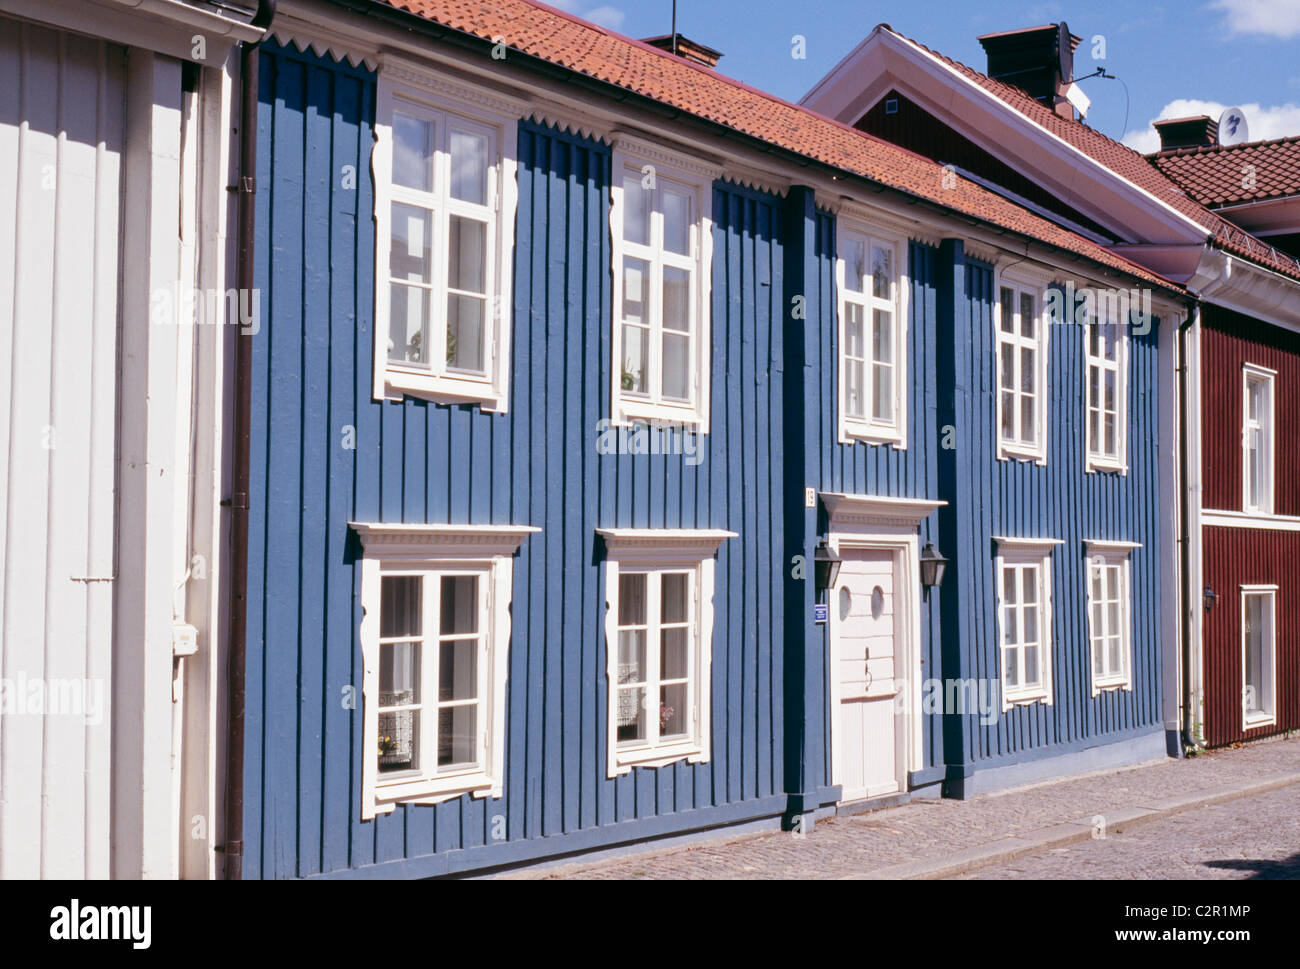 Row of colourful homes (blue, red) on street. Traditional style with timber cladding, 18th c. Vimmerby, Smaland. Stock Photo